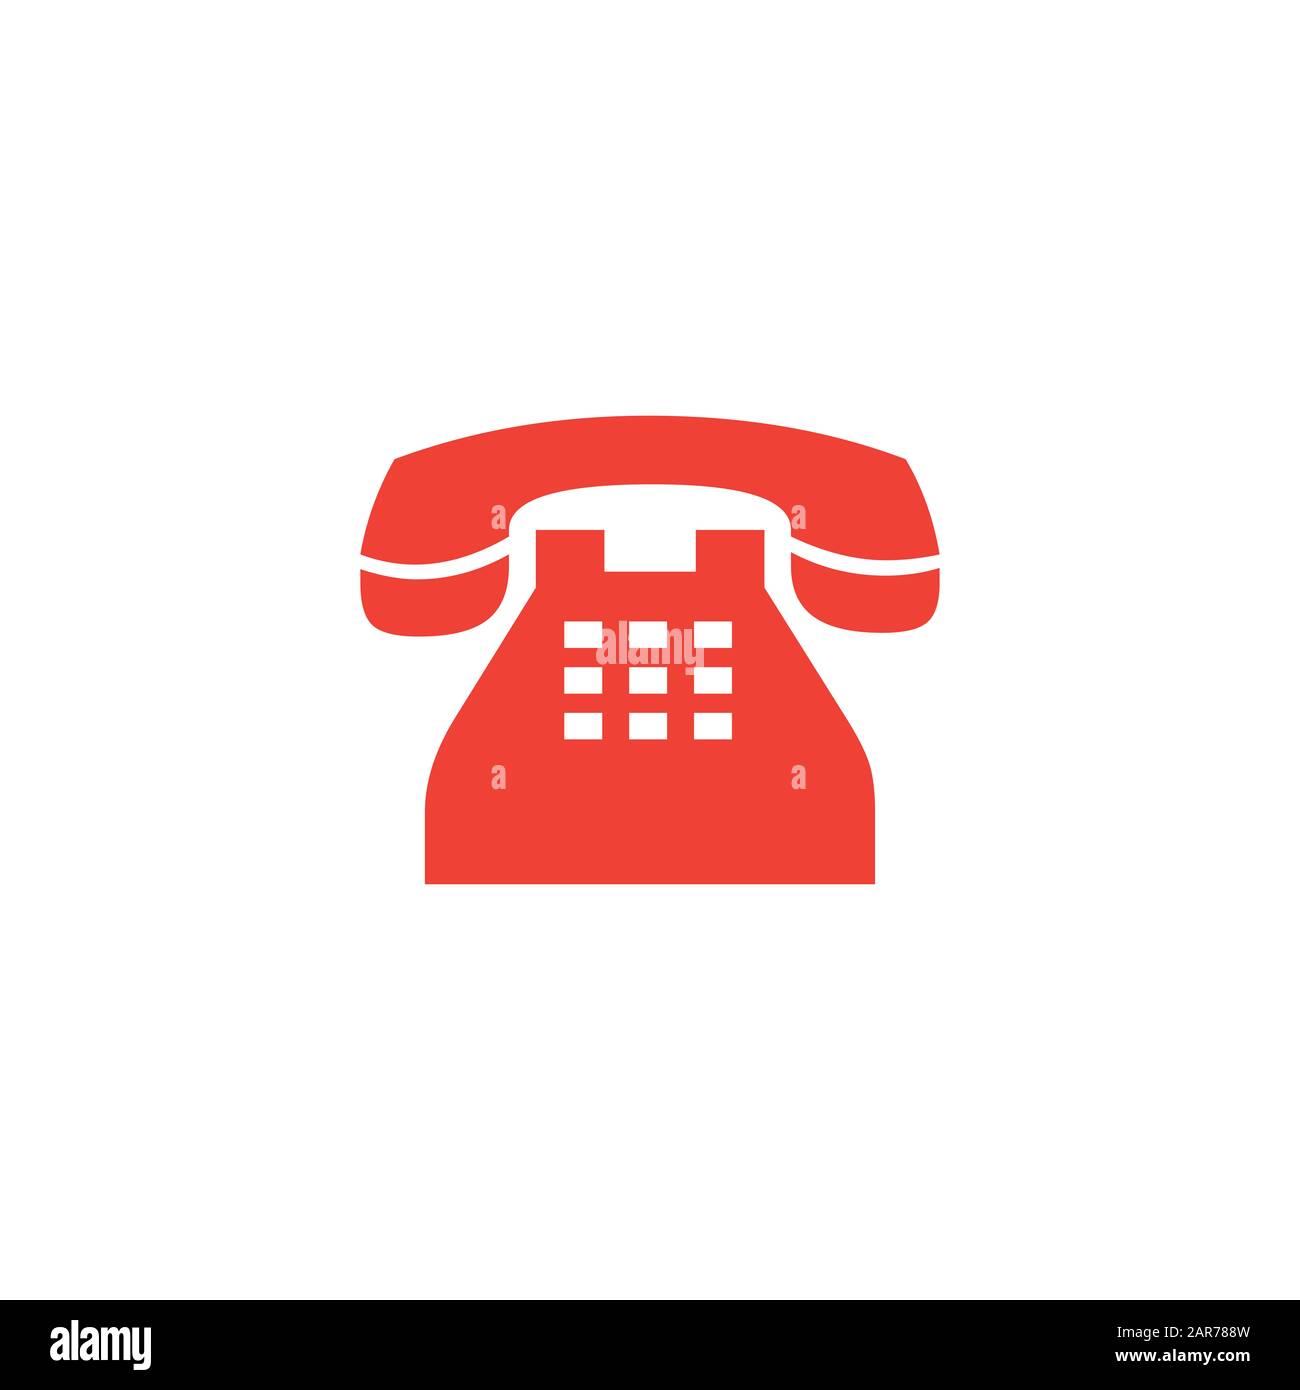 Telephone Red Icon On Red Flat Style Vector Illustration Stock - Alamy